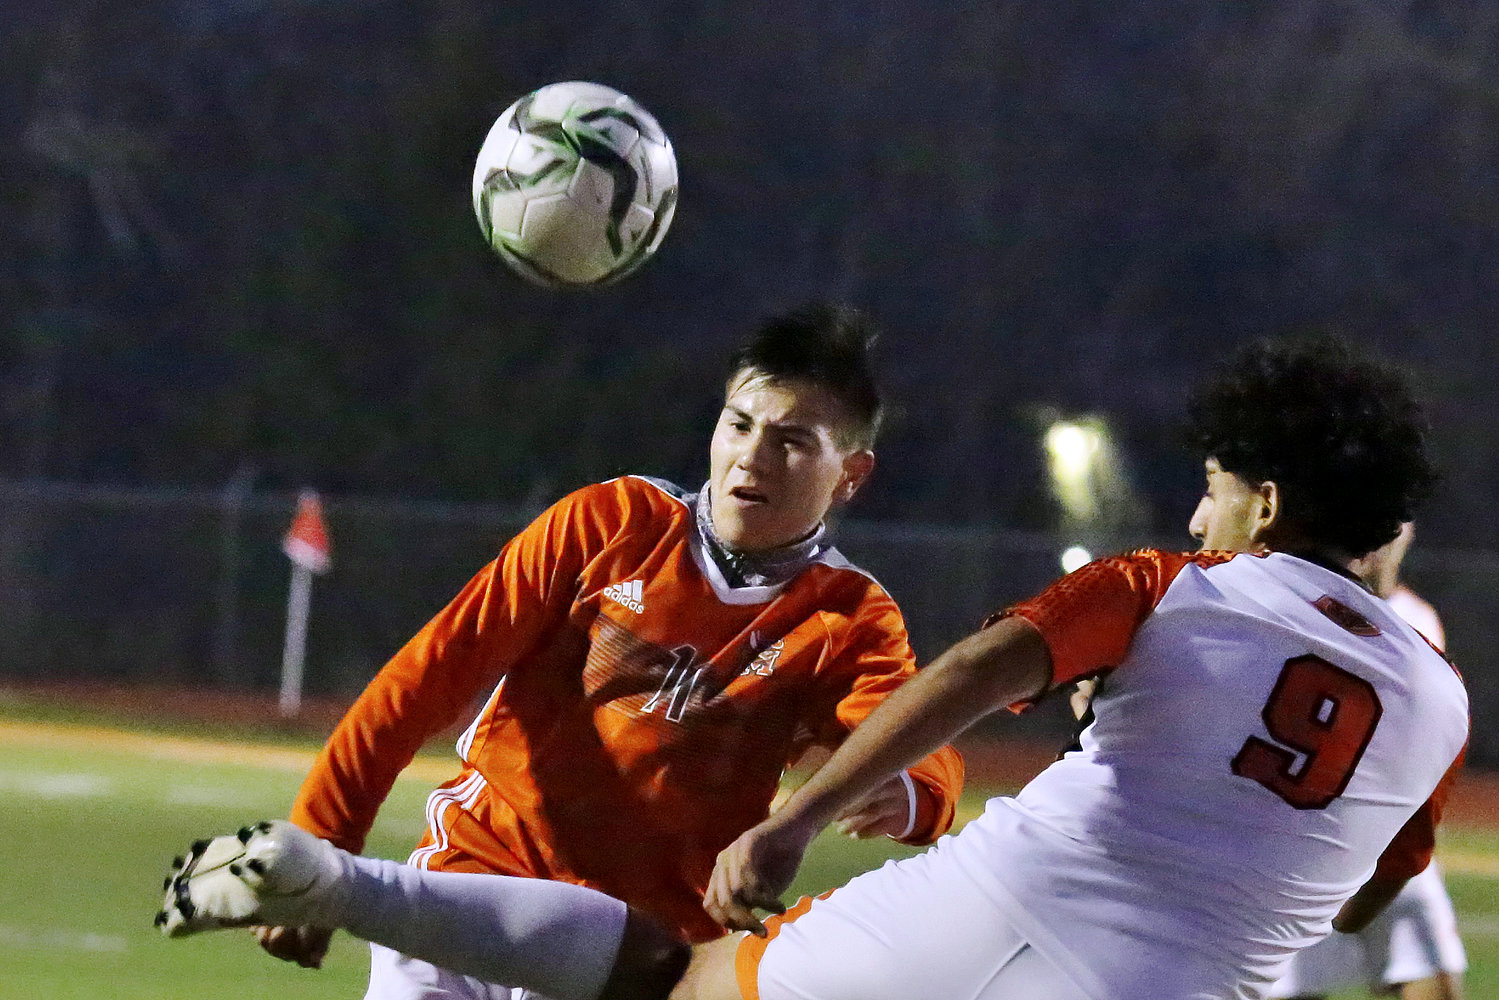 Mineola’s Fernando Rodriguez competes for a centering pass in Friday’s win against Gladewater.